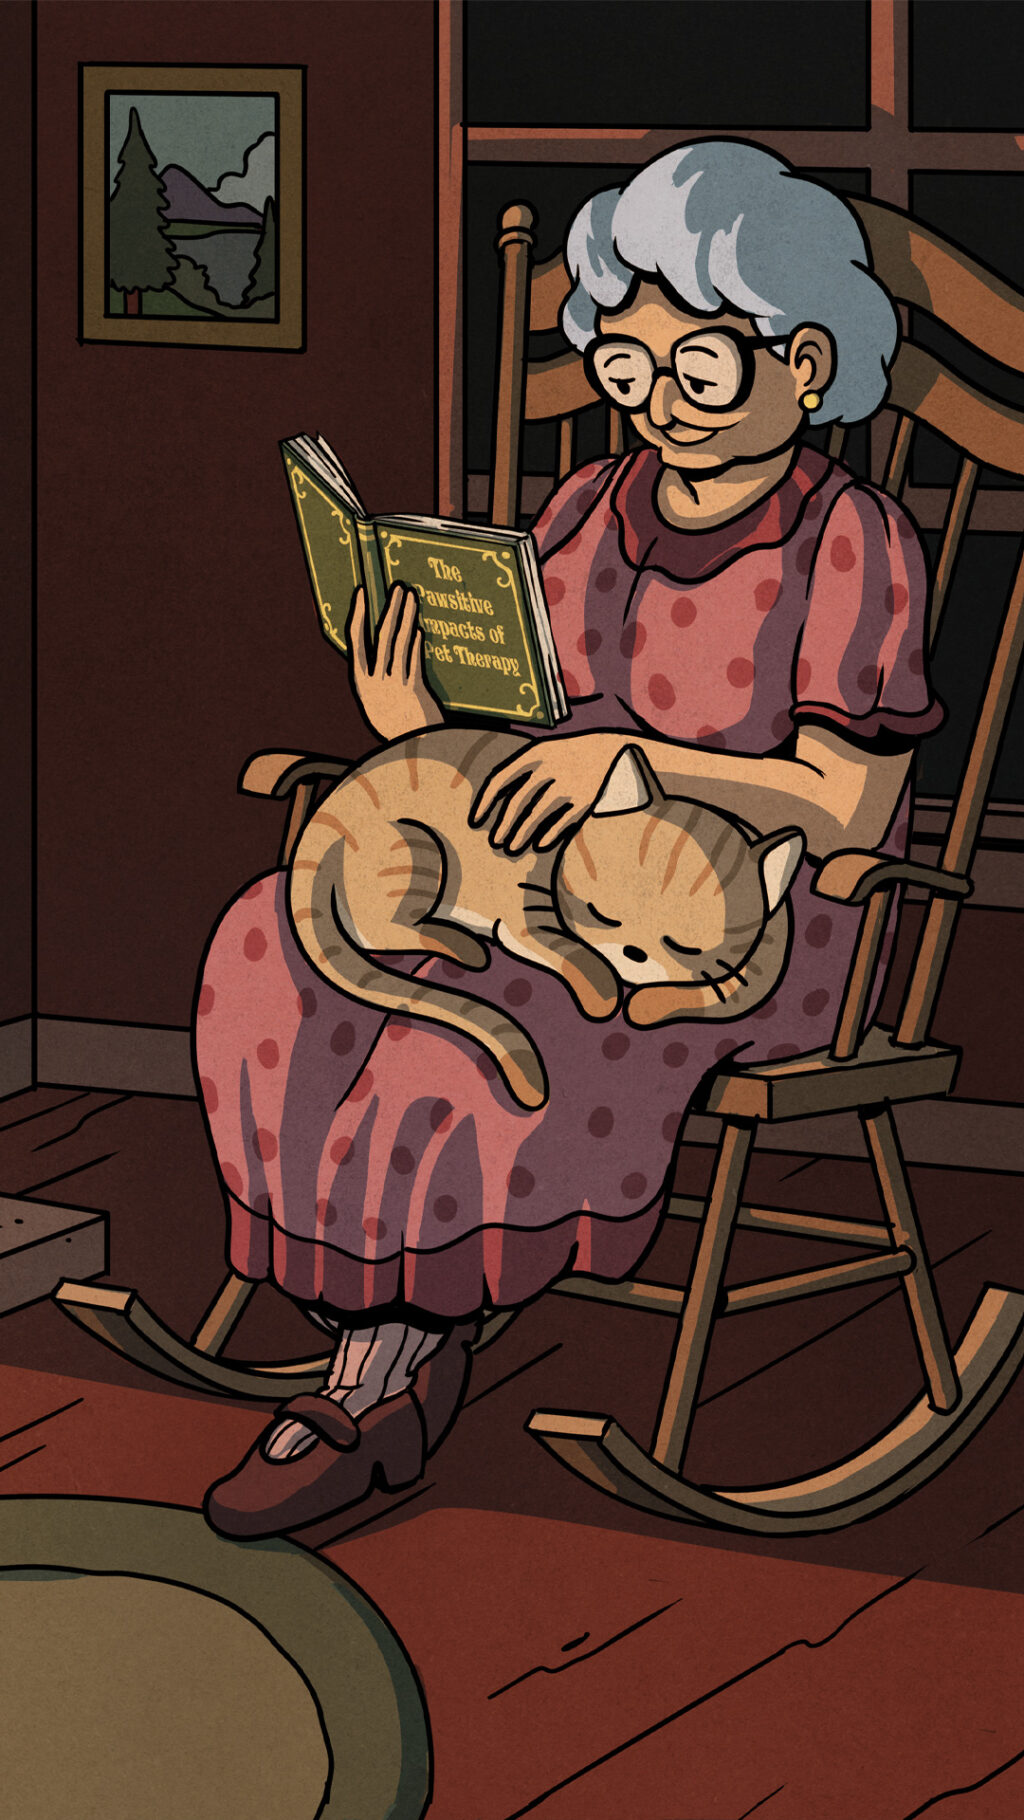 Cartoon of a woman in a rocking chair by a fire, reading a book. A cat is in her lap.